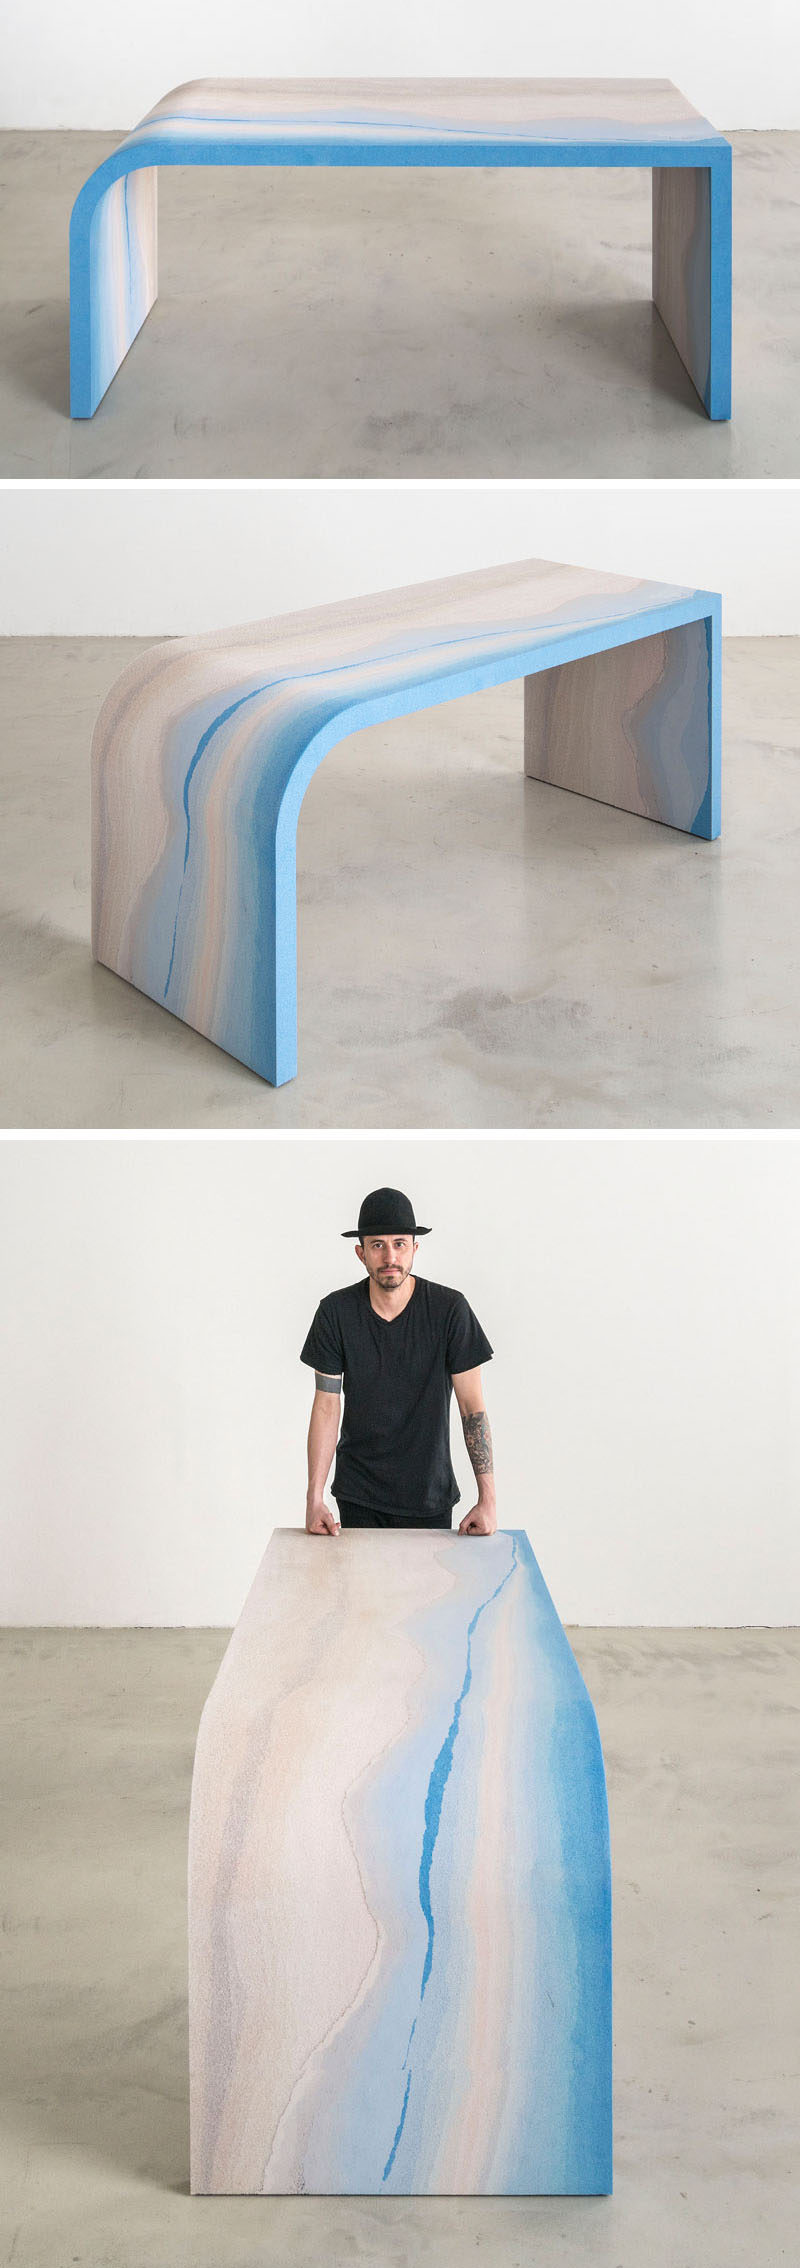 Designer Fernando Mastrangelo has created the Escape Collection, a group of modern furniture pieces, like this desk, that are made using hand-dyed sand and silica to create simple forms that look like a three-dimensional landscape painting.